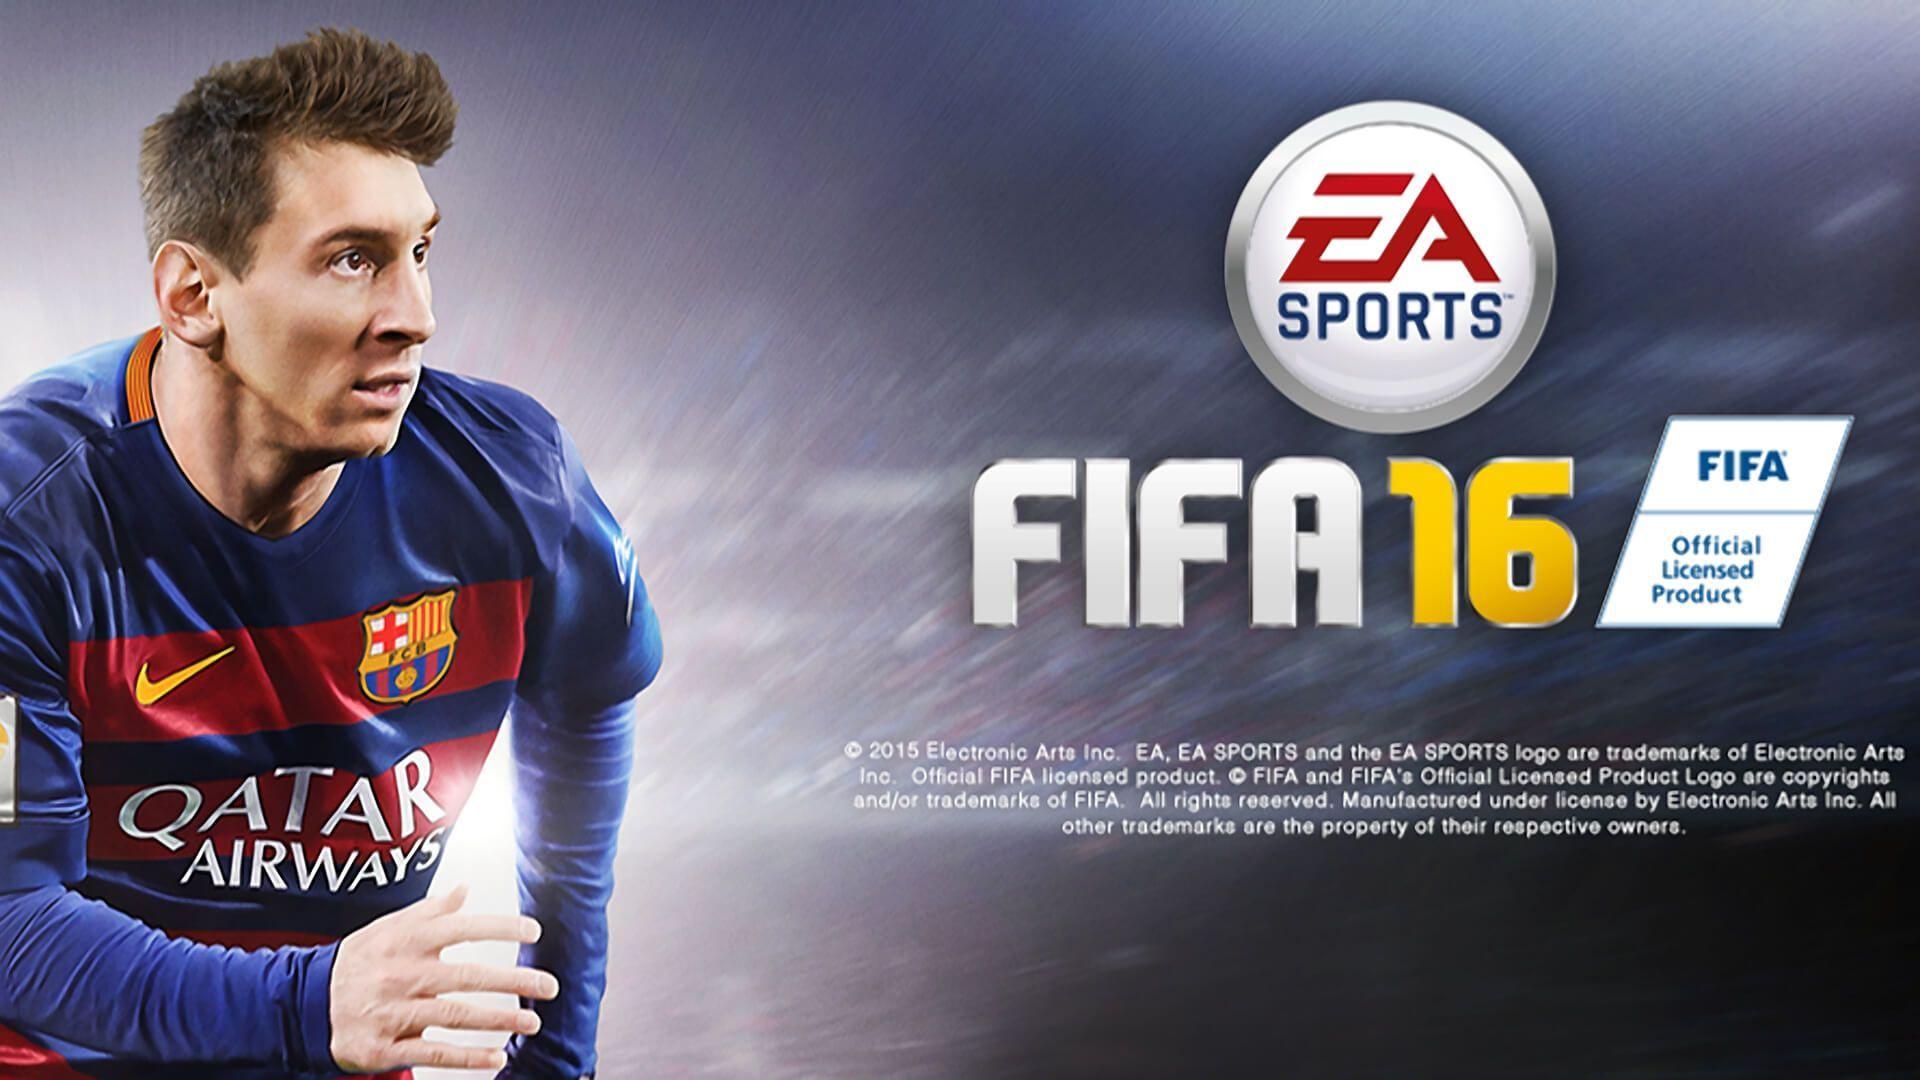 Download 1920x1080 FIFA 16 Leo Messi 2016 Official Cover Poster